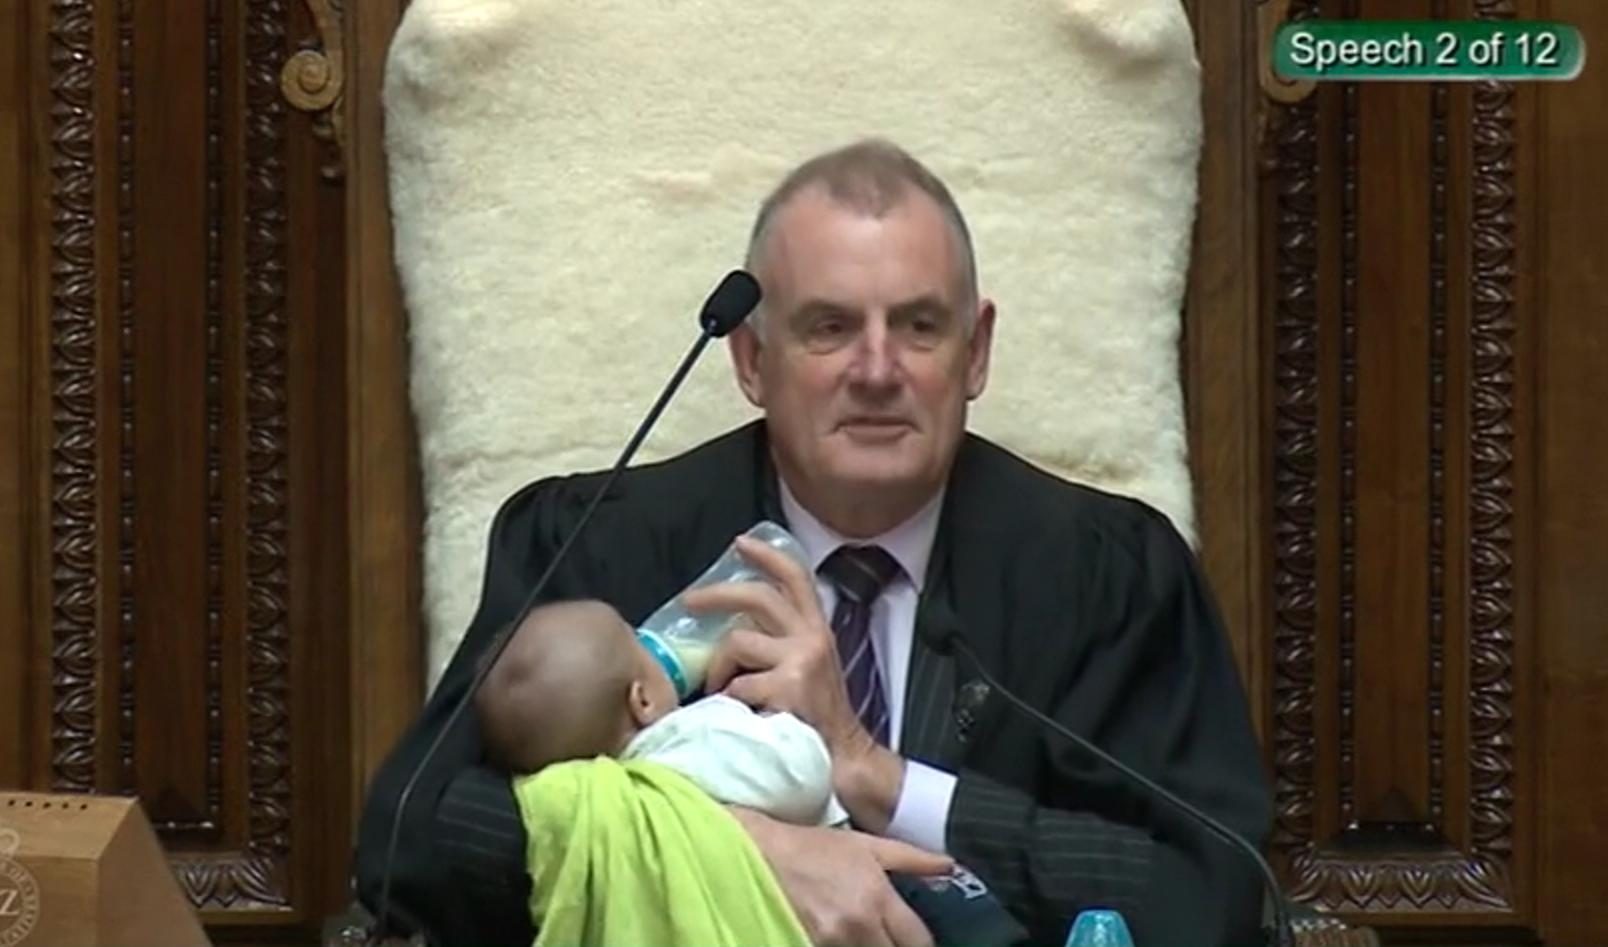 New Zealand House speaker goes viral after bottle-feeding baby in parliament